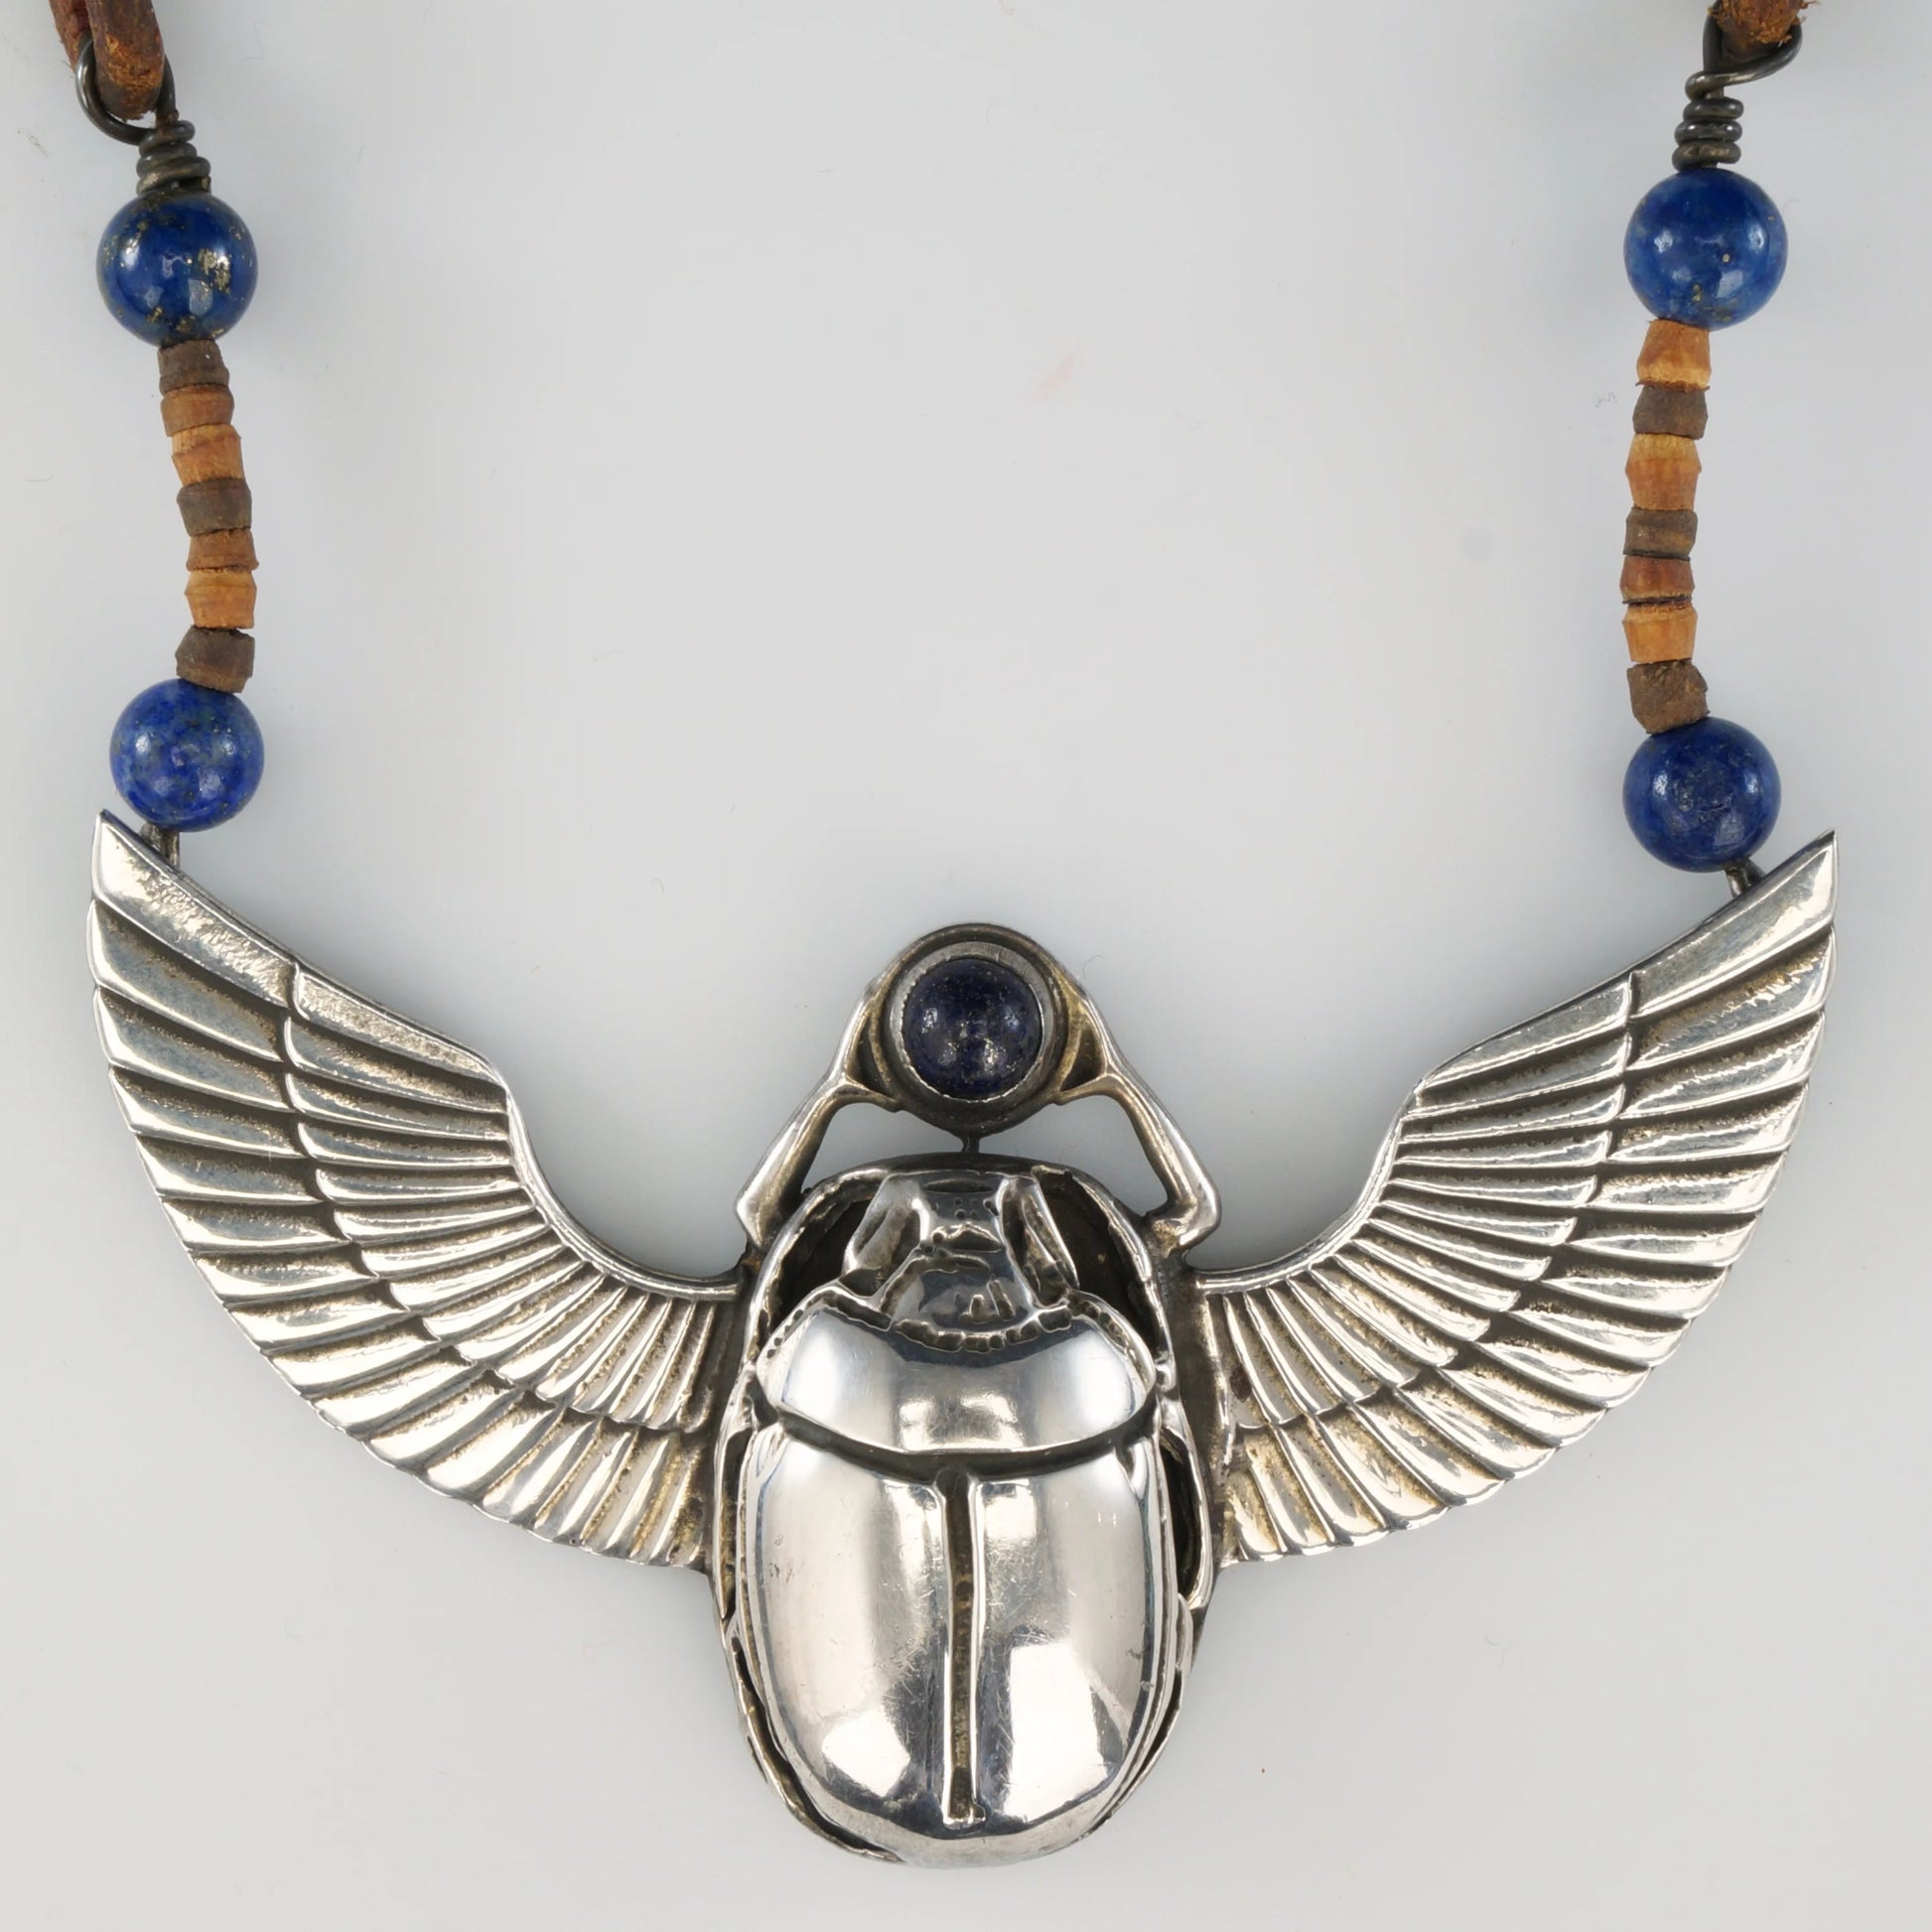 Vintage Egyptian Revival 800 Silver Winged Scarab Unisex Chocker Necklace 1977 - Bear and Raven Antiques